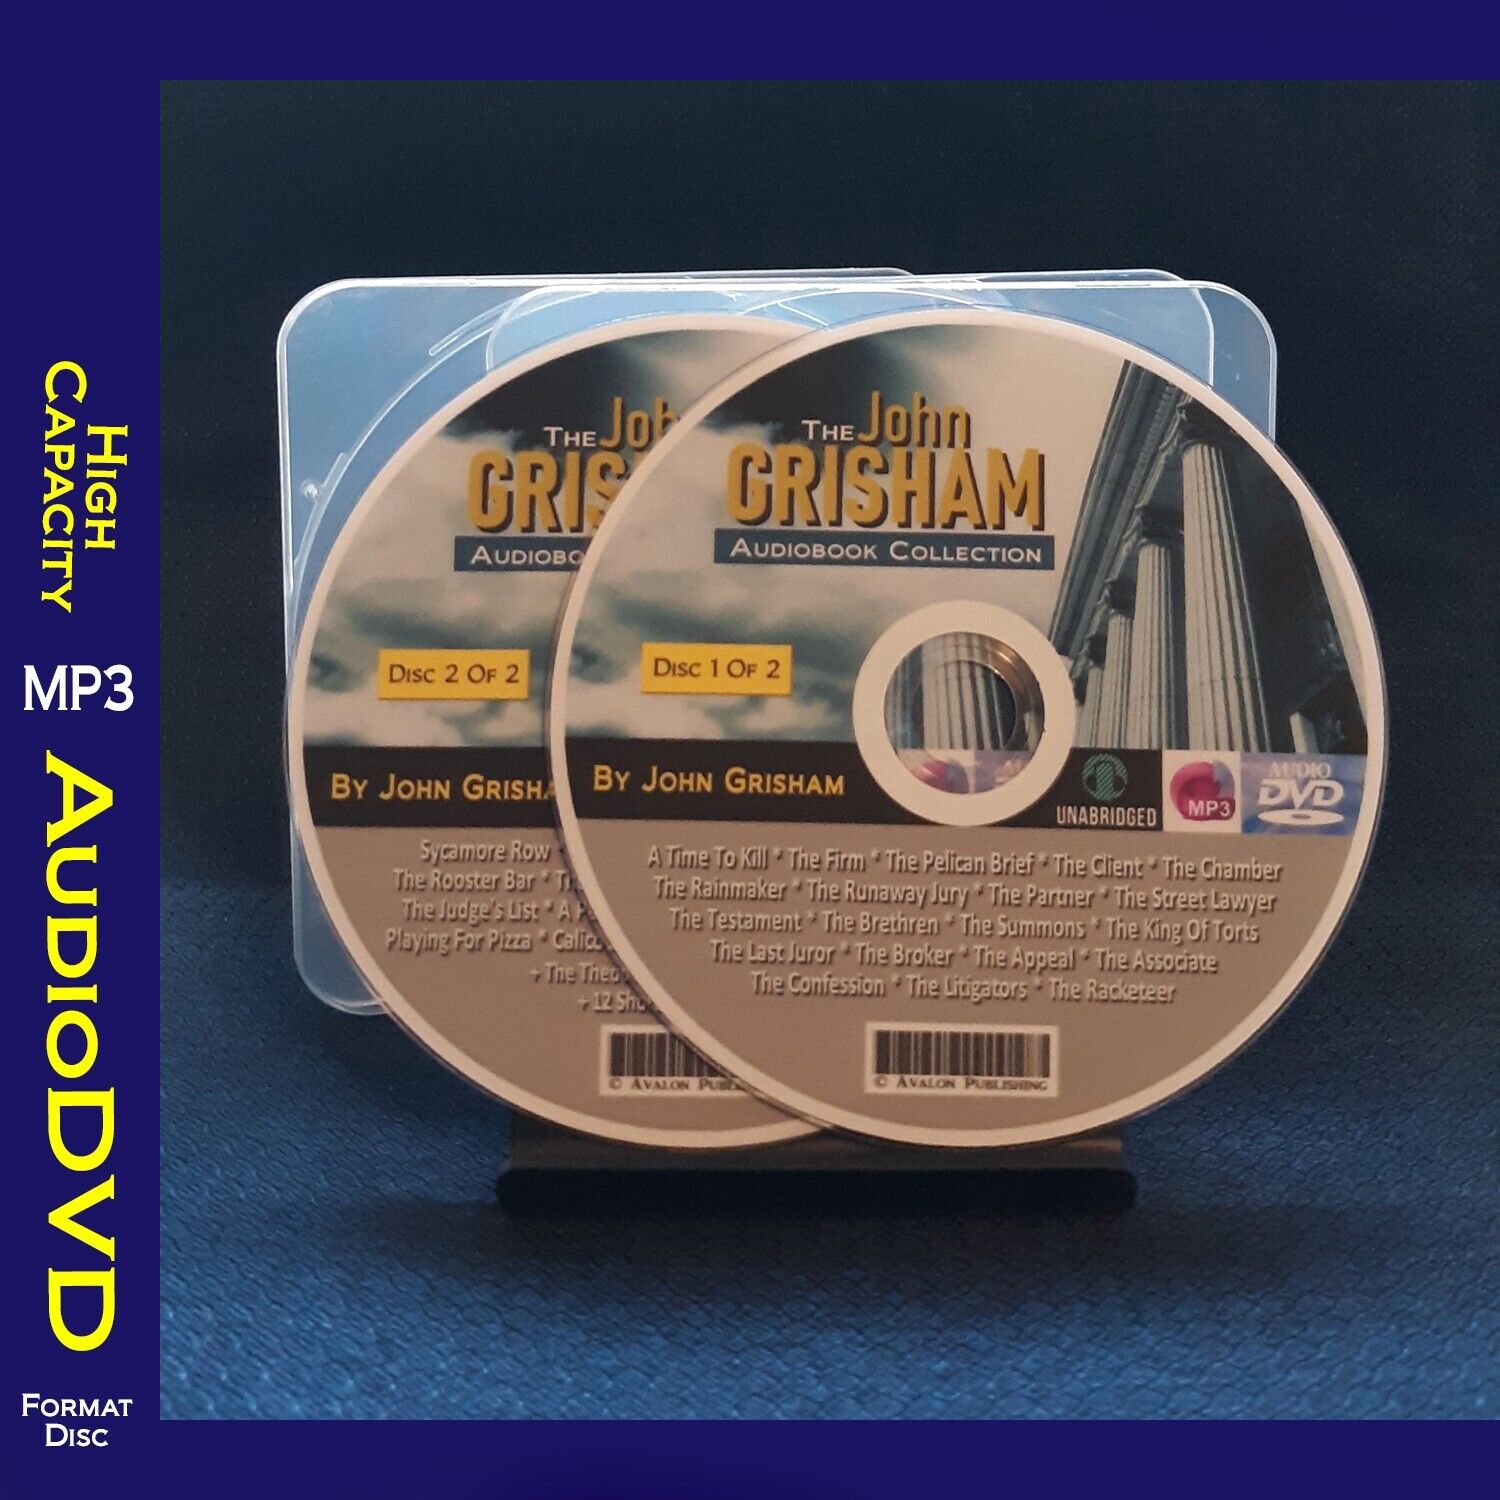 The JOHN GRISHAM Legal Thrillers & More - 56 MP3 Audiobook Collection